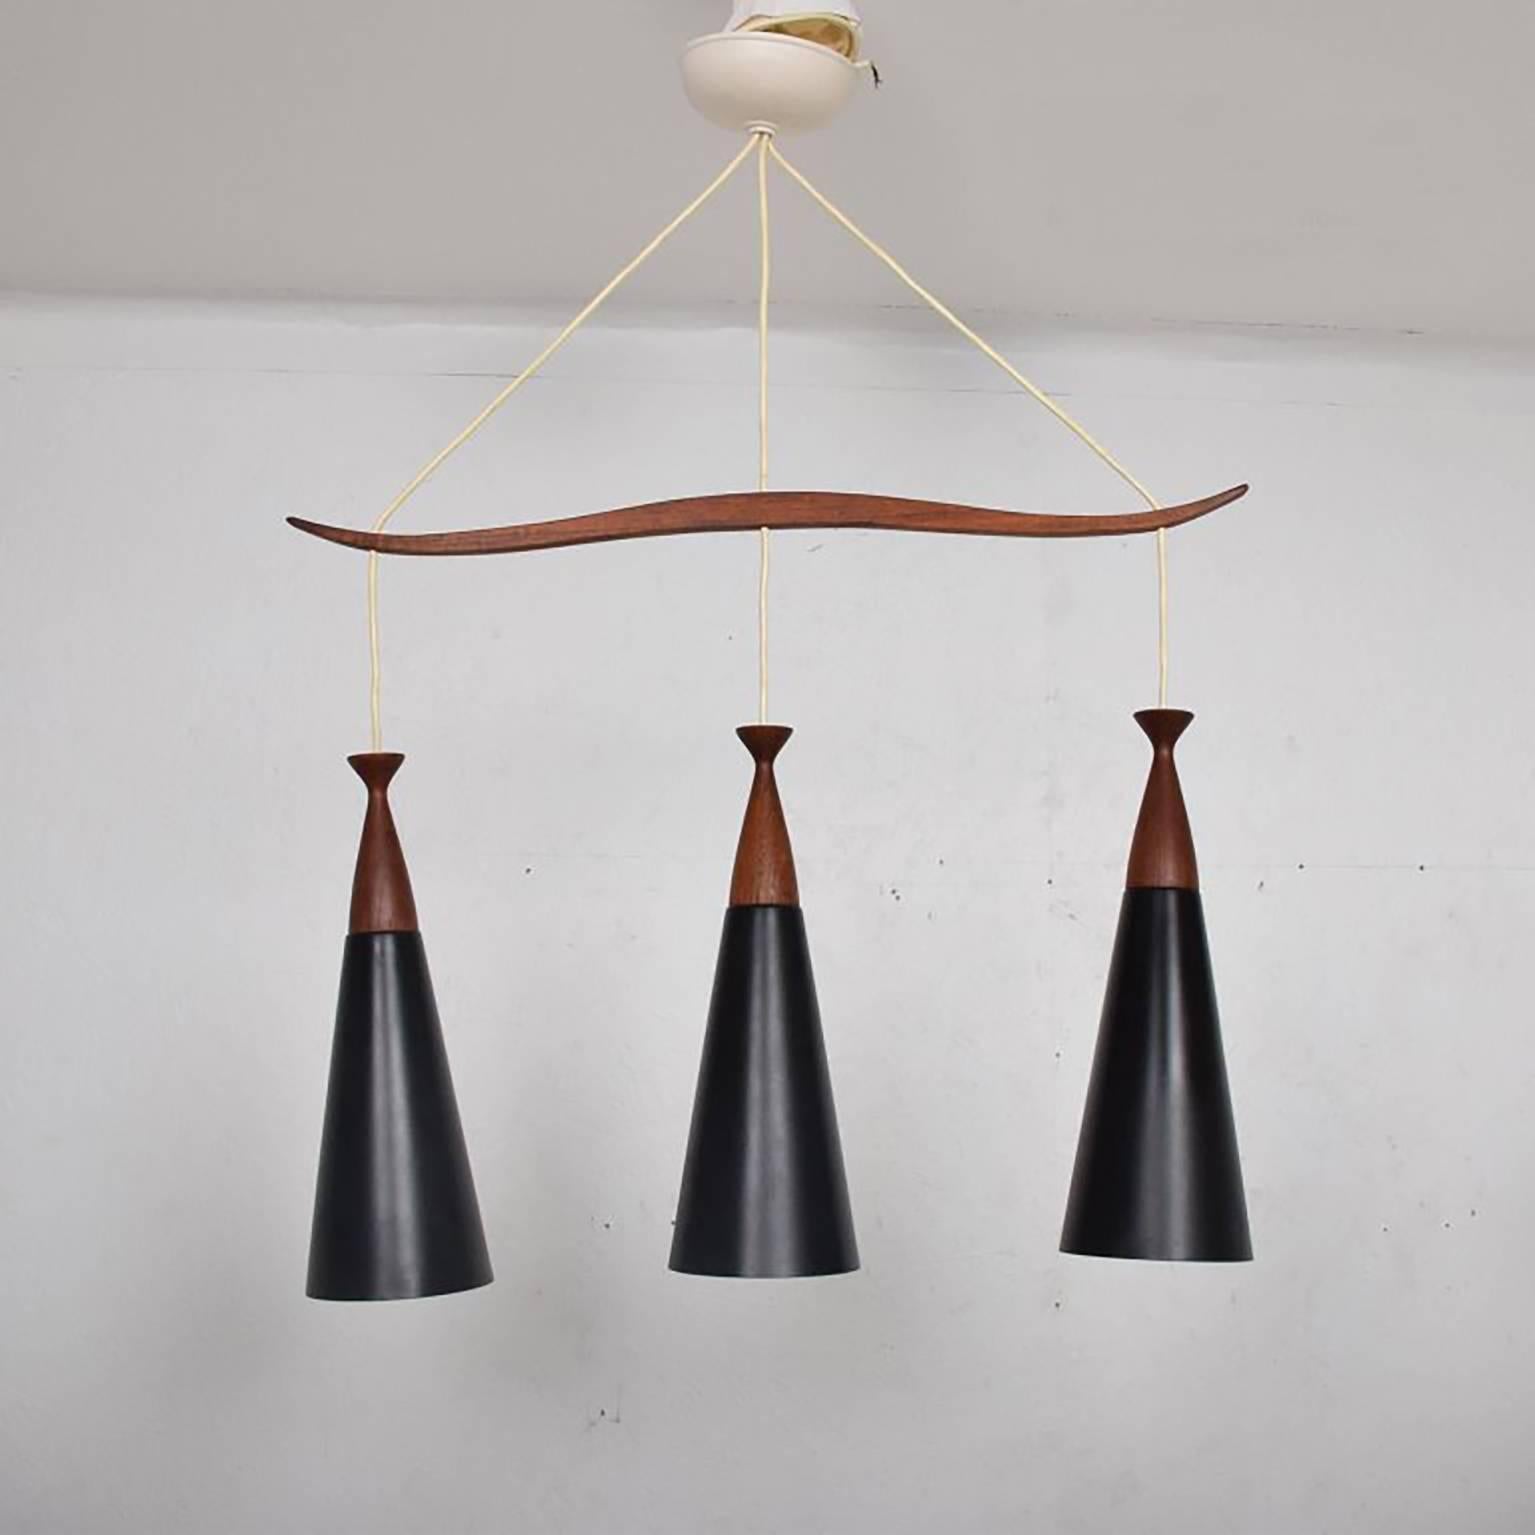 For your consideration, a vintage teak pendant lighting with three shades of aluminum painted in black with teak canopies. 
Beautiful sculptural shape.
Dimensions: 32